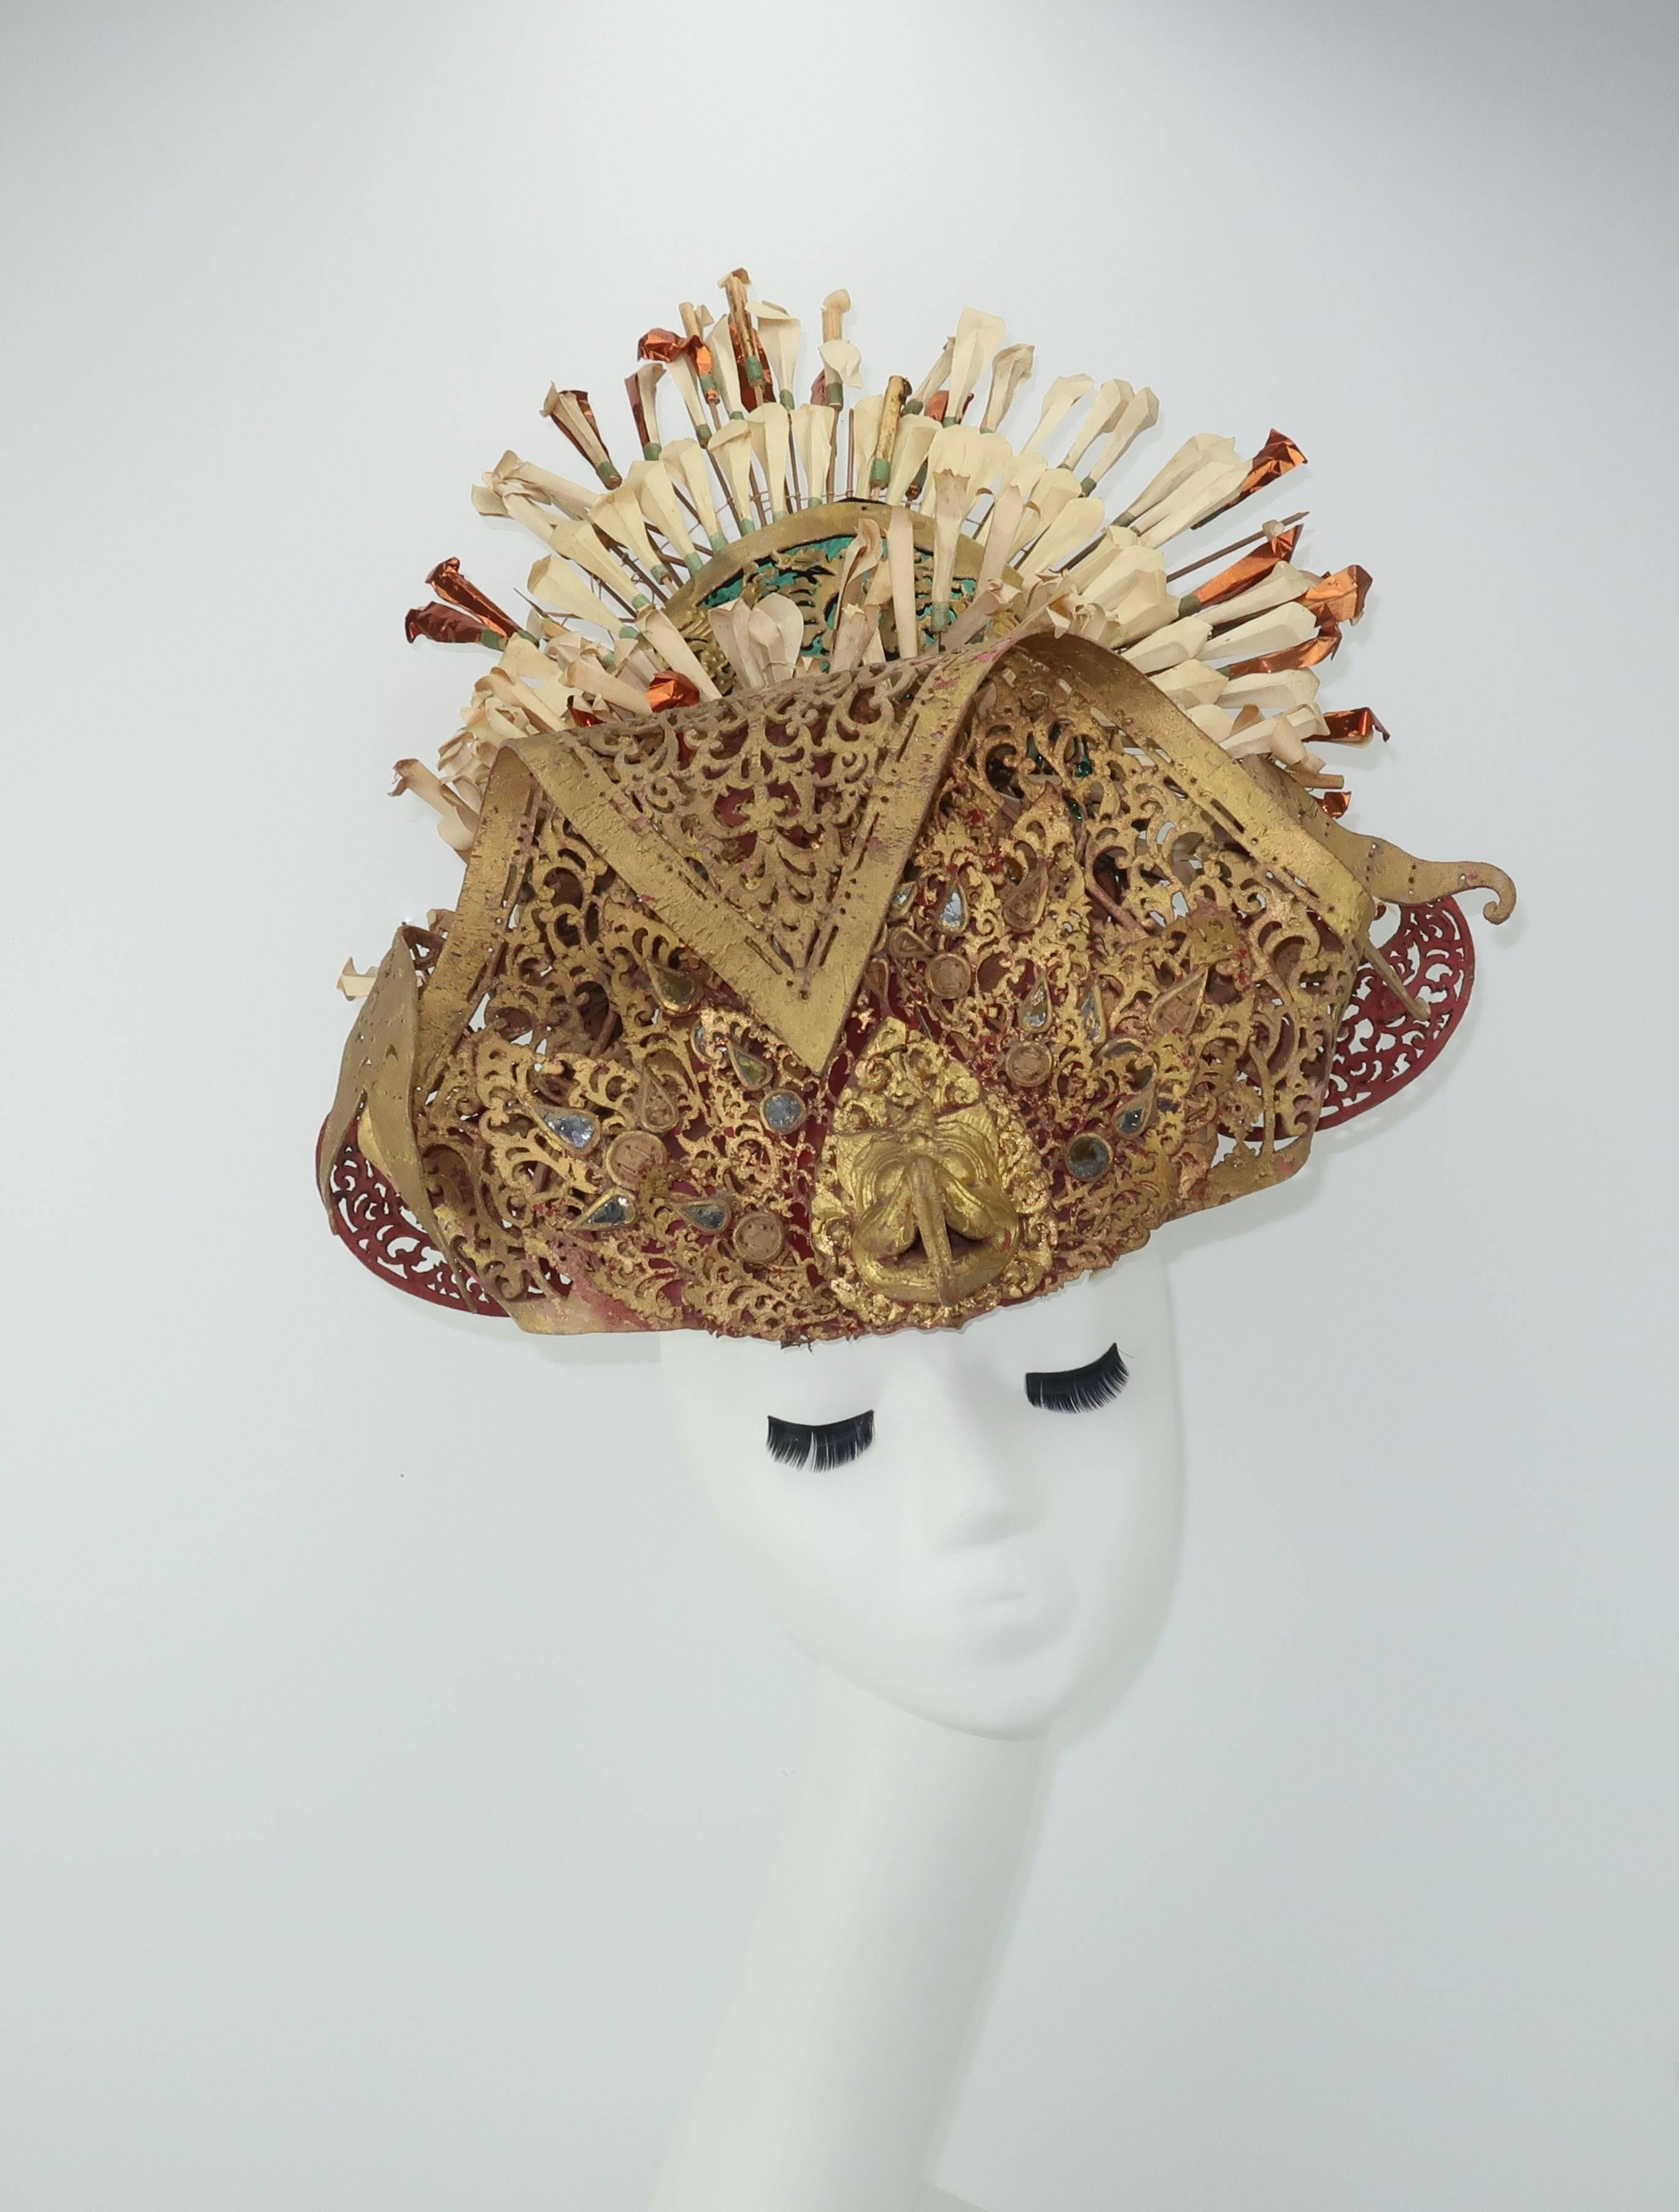 Majestically magnificent!  This Balinese headdress was acquired in the 1930's by the original owner while on a honeymoon trip.  Probably made for the tourist market, these headdresses were designed to replicate the fine bejewelled adornments worn by